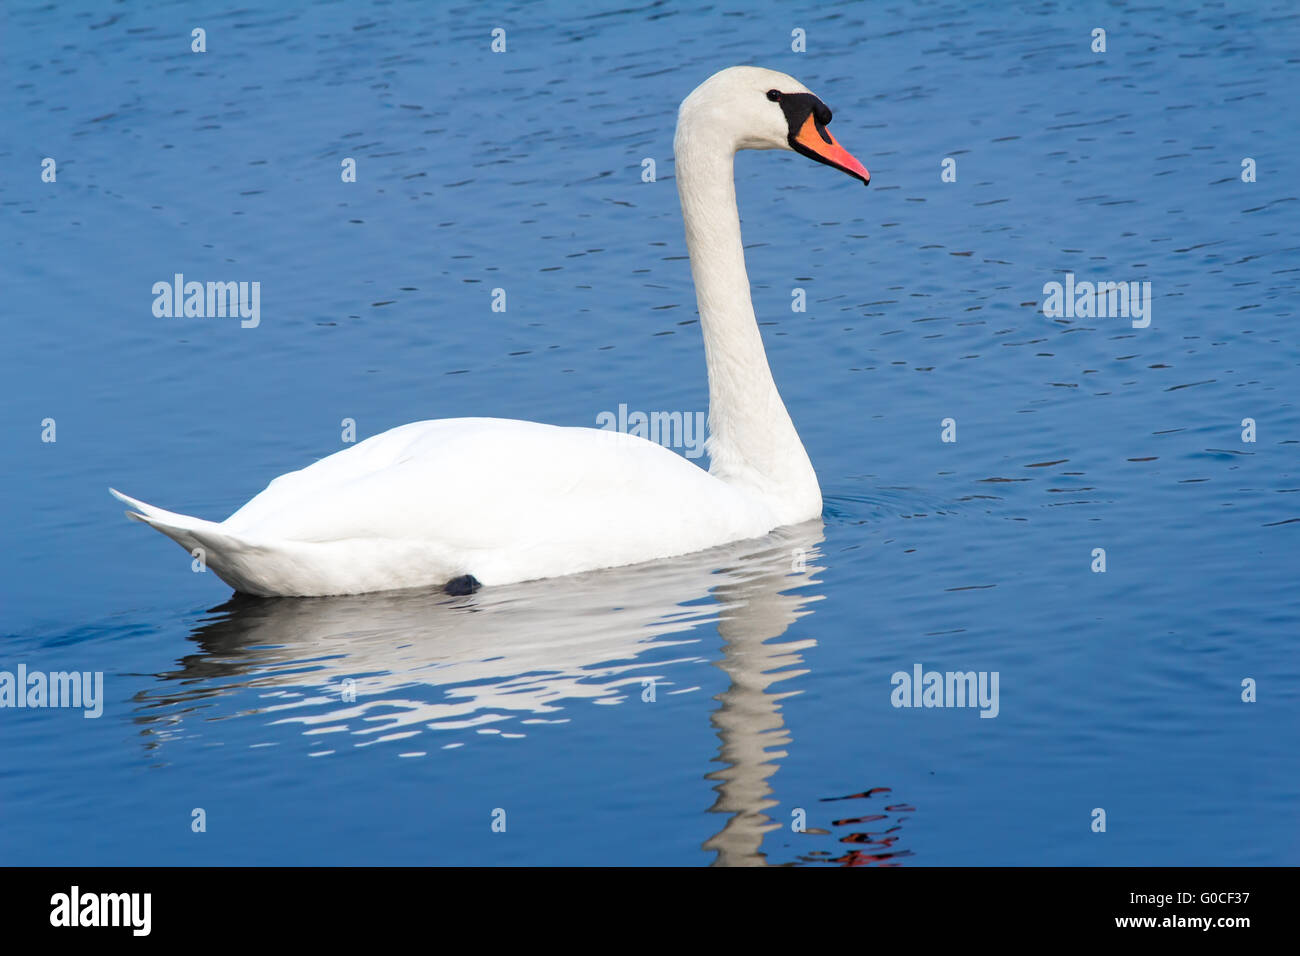 White Swan on blue water of the lake. Stock Photo